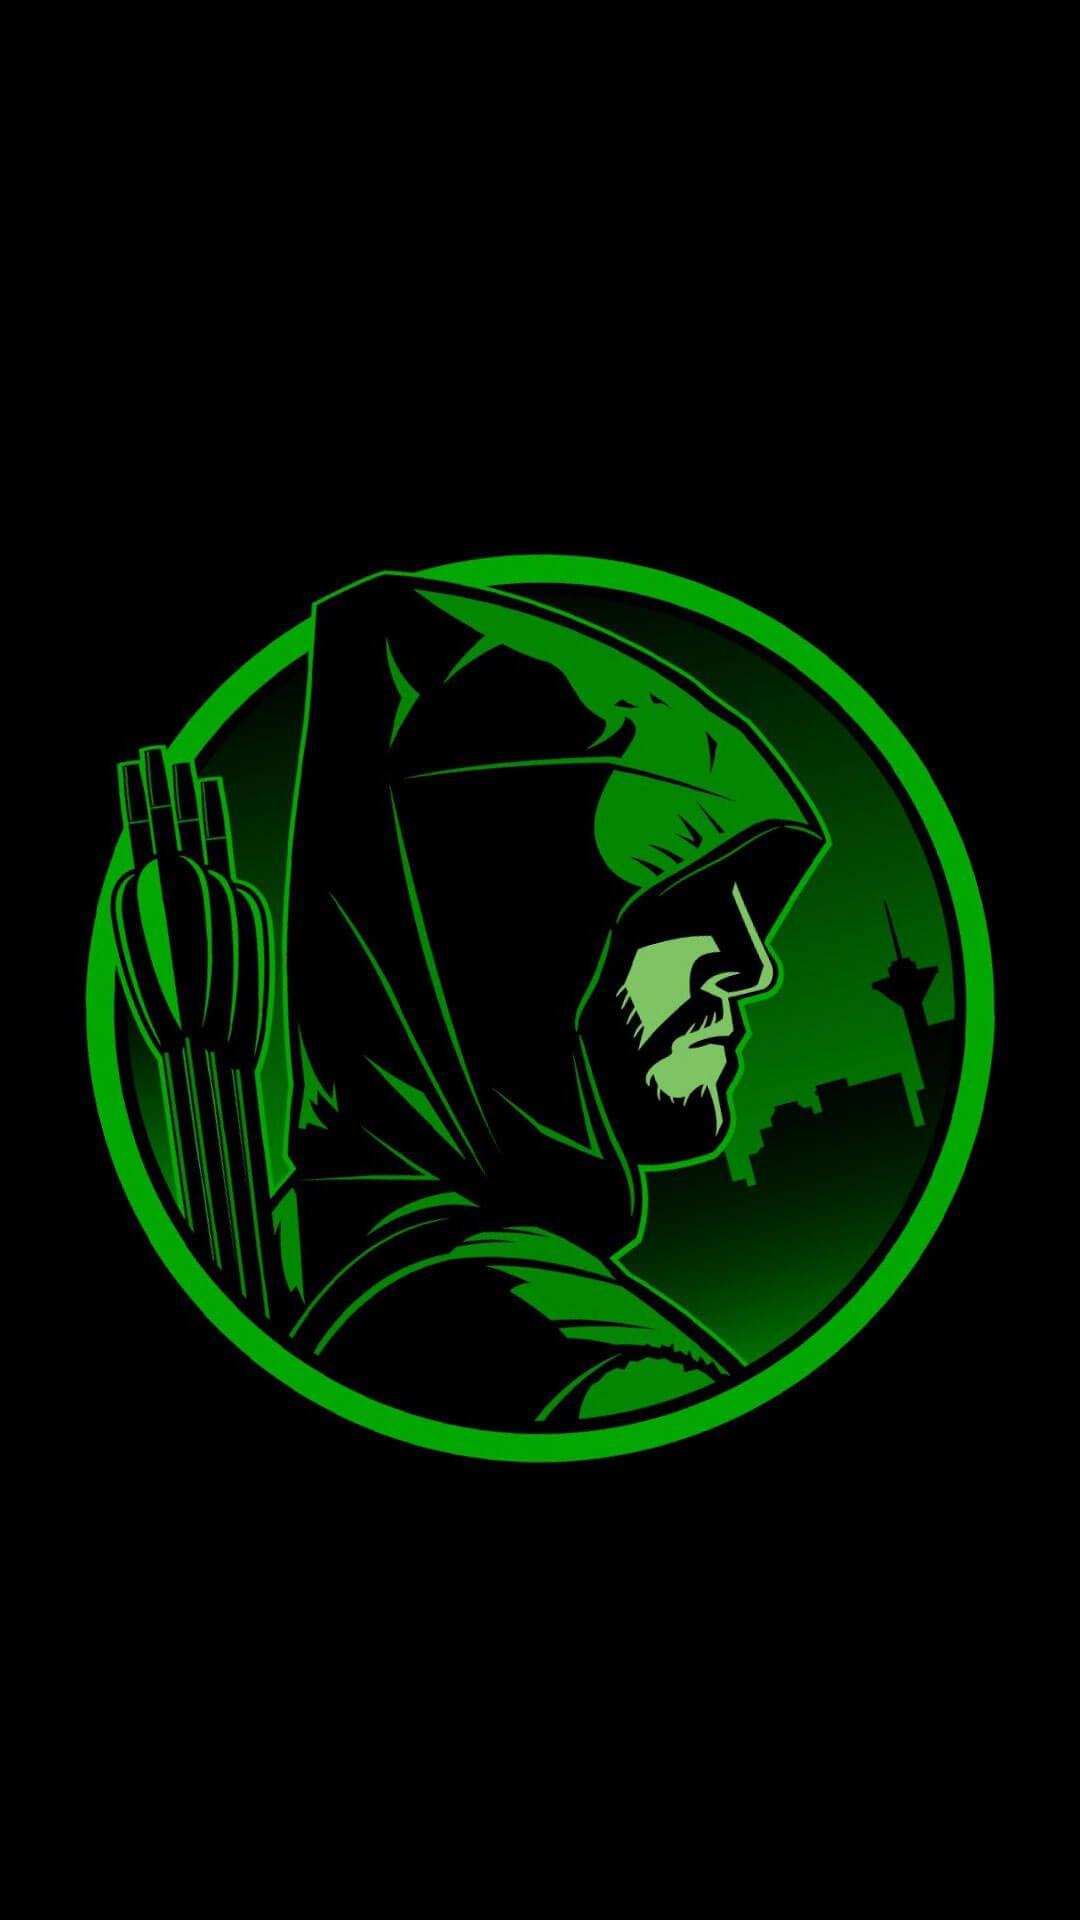 Download Arrow Picture for Android. Green arrow comics, Green arrow, Green arrow logo